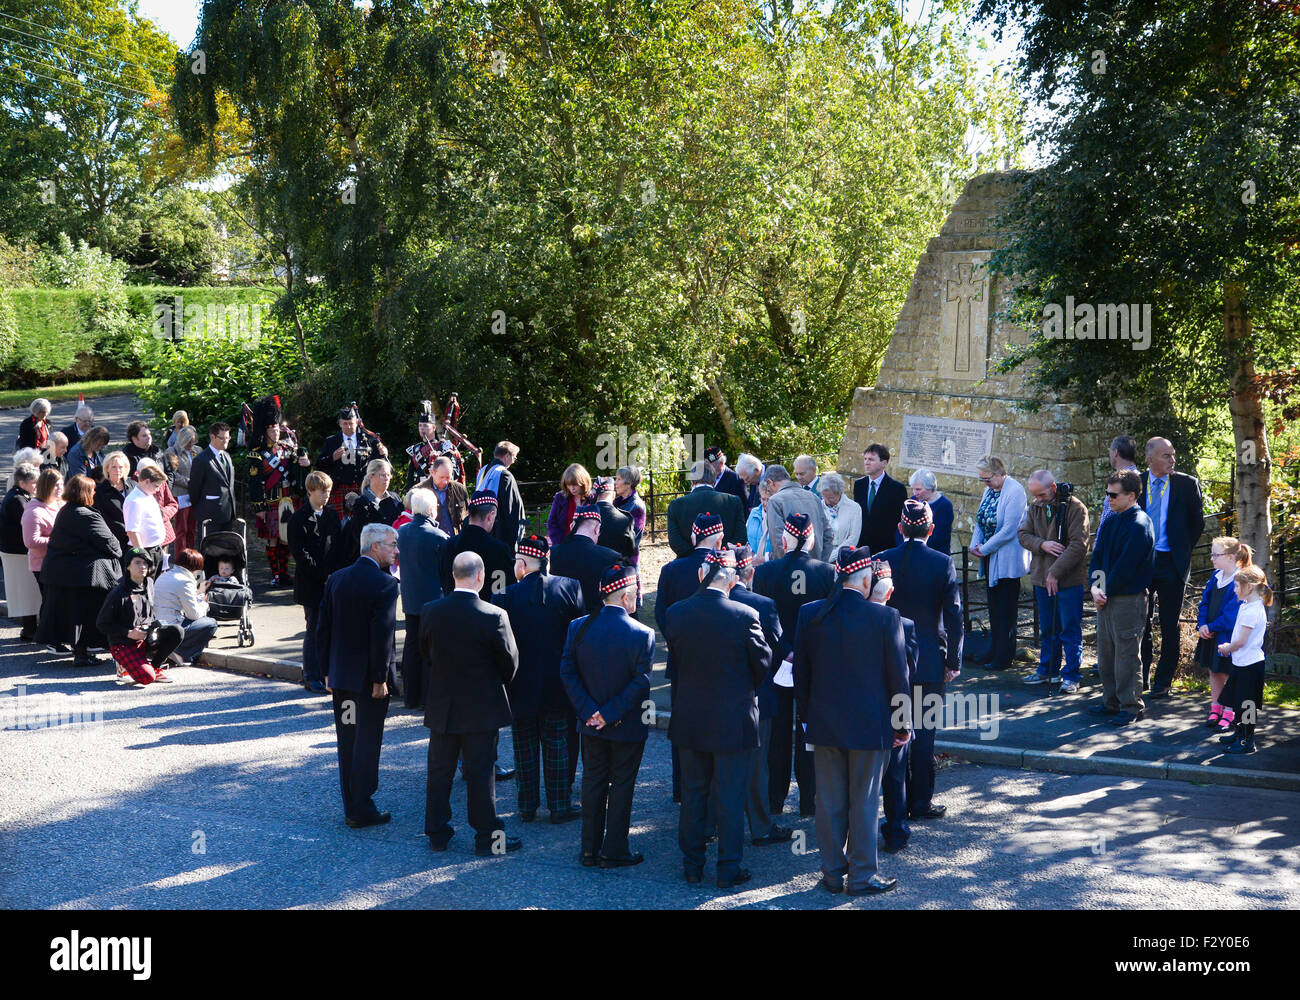 Swinton, UK. 25th Sep, 2015. The Laying of the Commemorative Victoria Cross  Stone in the small Scottish Border village of Swinton to mark the 100th Anniversary of the award of the Victoria Cross to Piper Daniel Laidlaw for his actions whilst serving with the 7th Battalion of the King's Own Scottish Borderers.   Daniel Logan Laidlaw was born at Little Swinton, Berwickshire on 26 July 1875 and joined the Army in 1896. He served with the Durham Light Infantry in India where he received a certificate for his work during a plague outbreak in Bombay in 1898. Stock Photo